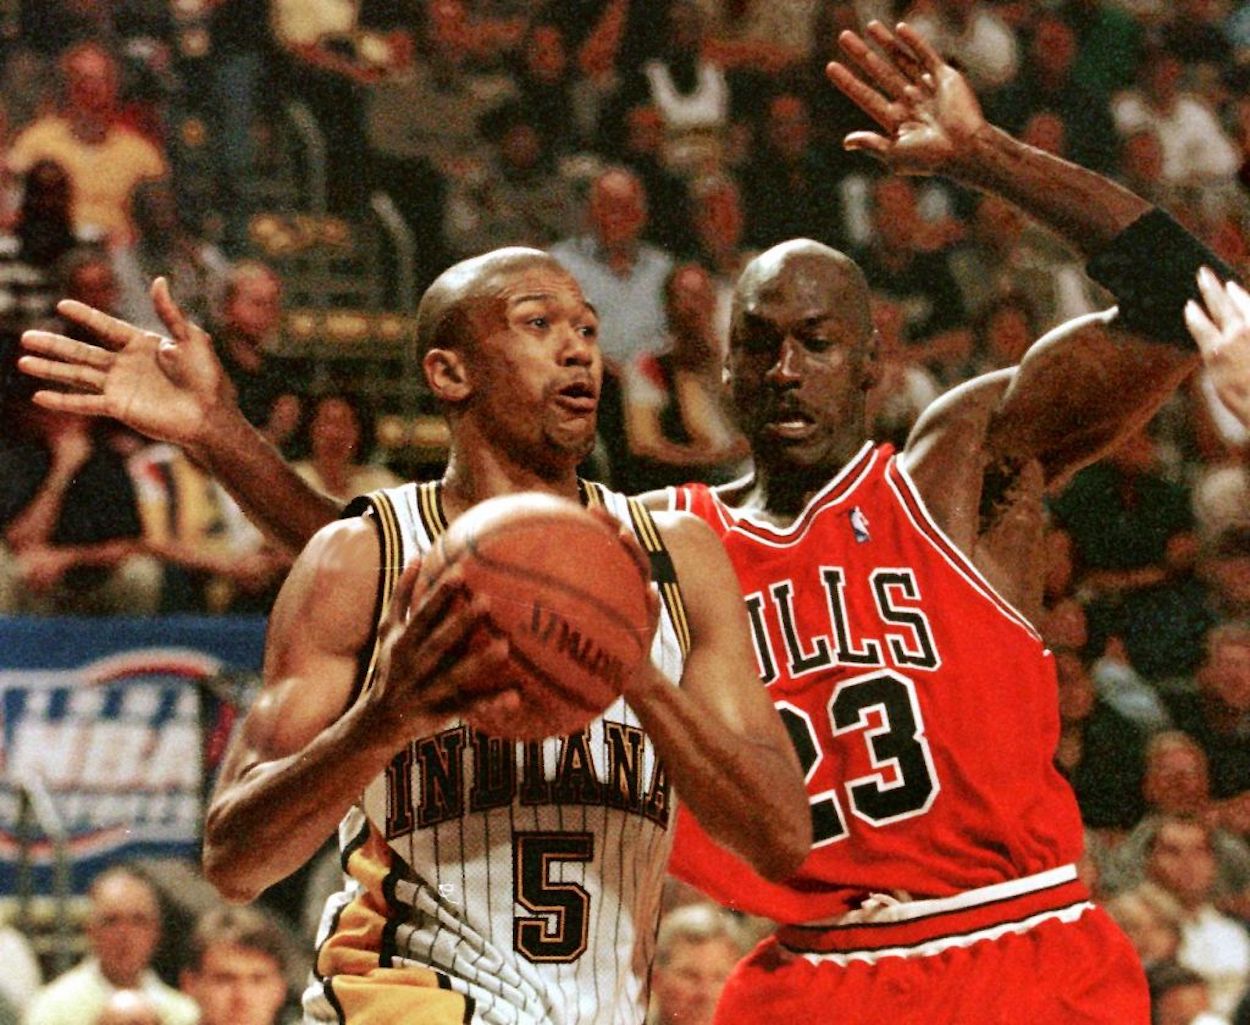 Jalen Rose (L) is defended by Michael Jordan (R) during an NBA game.